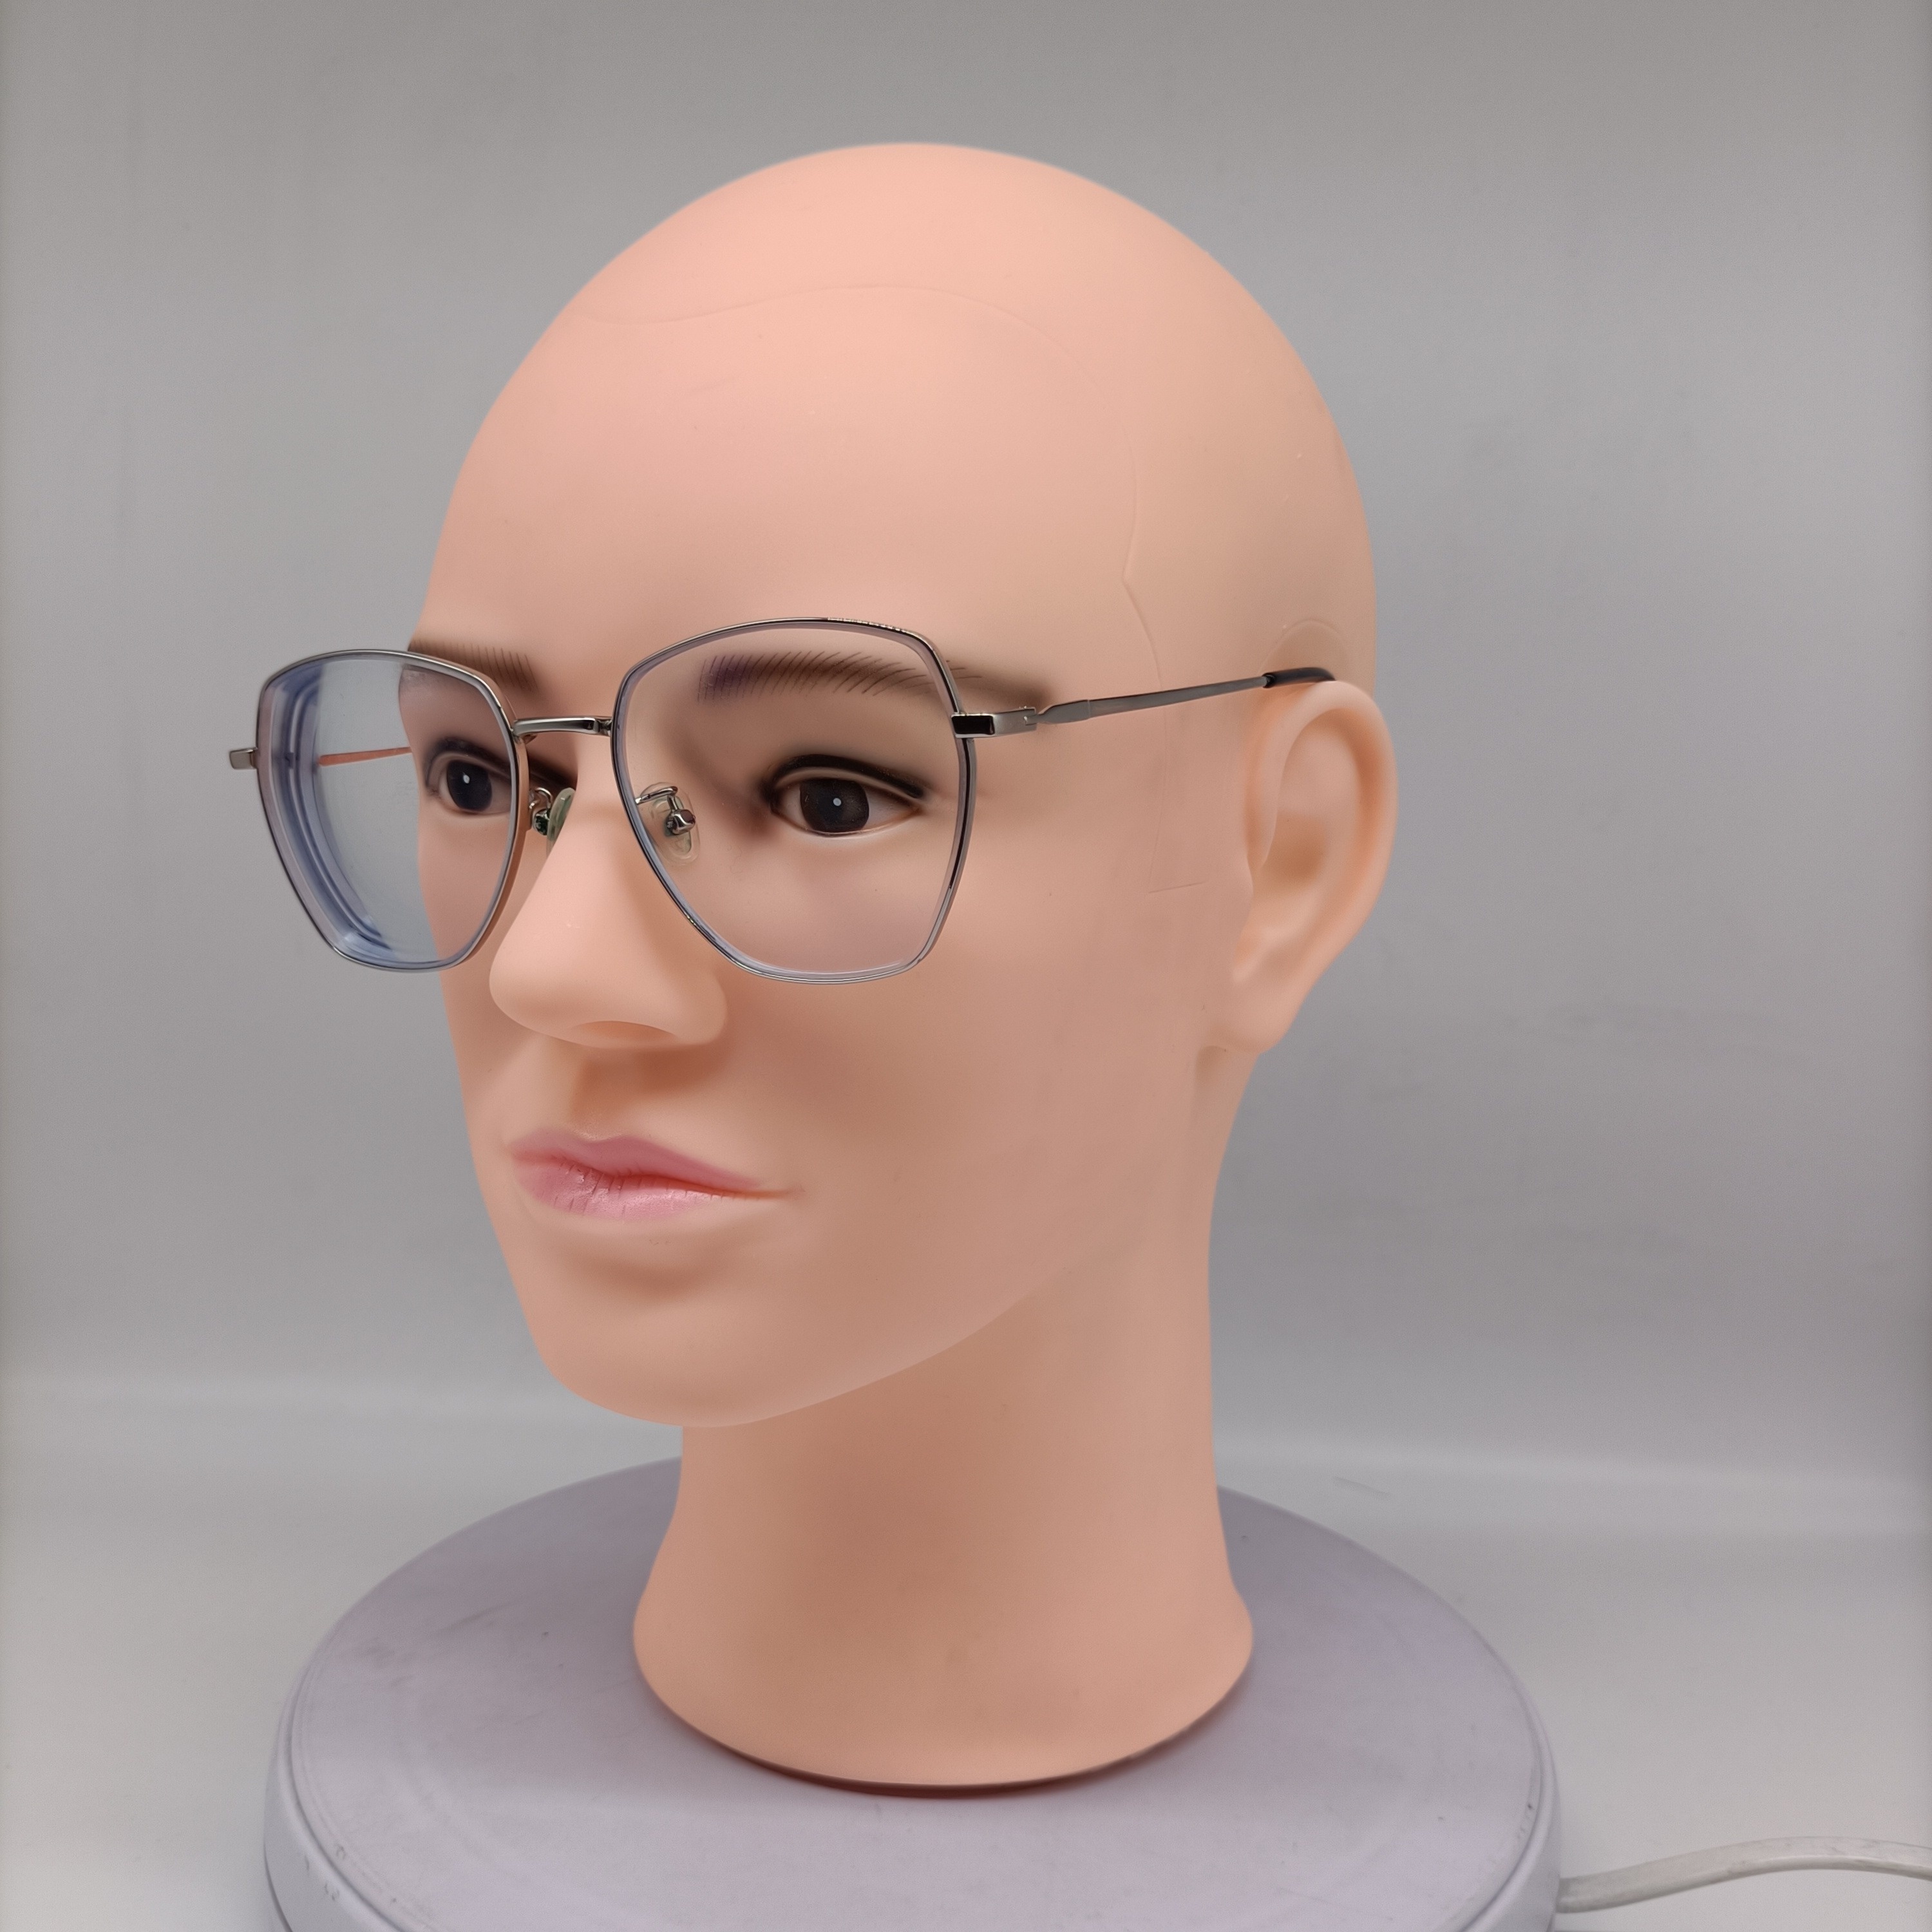 HAIRWAY Male Bald Mannequin Head Professional Cosmetology Face